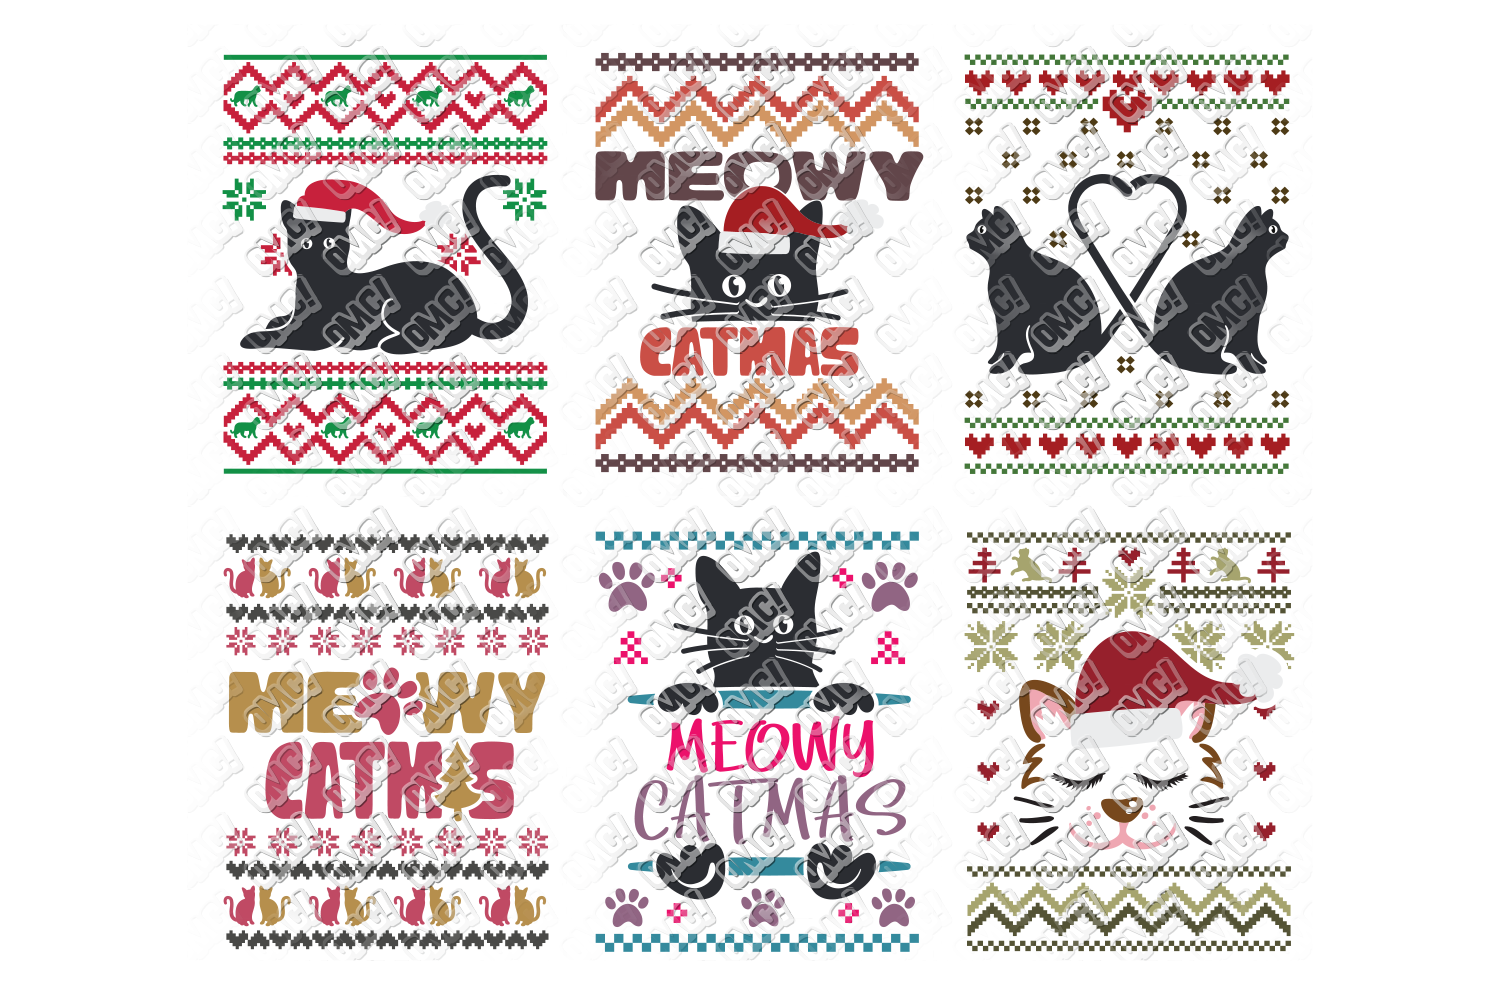 Cat Ugly Christmas SVG Sweater in SVG, DXF, PNG, EPS, JPEG (130977